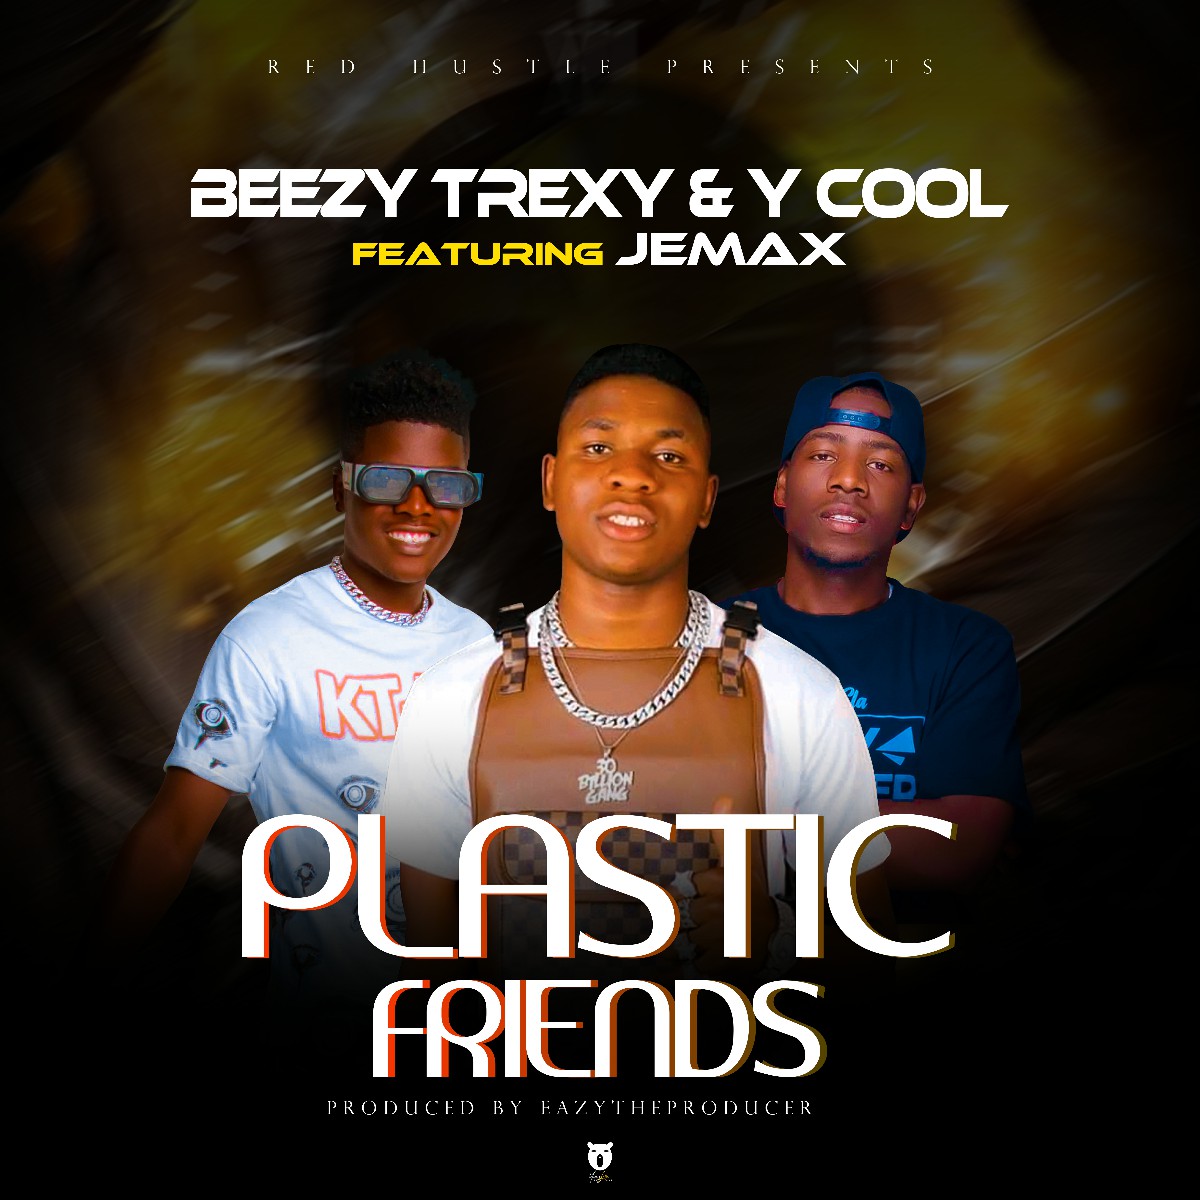 Beezy Trexy & Y Cool ft. Jemax - Plastic Friends